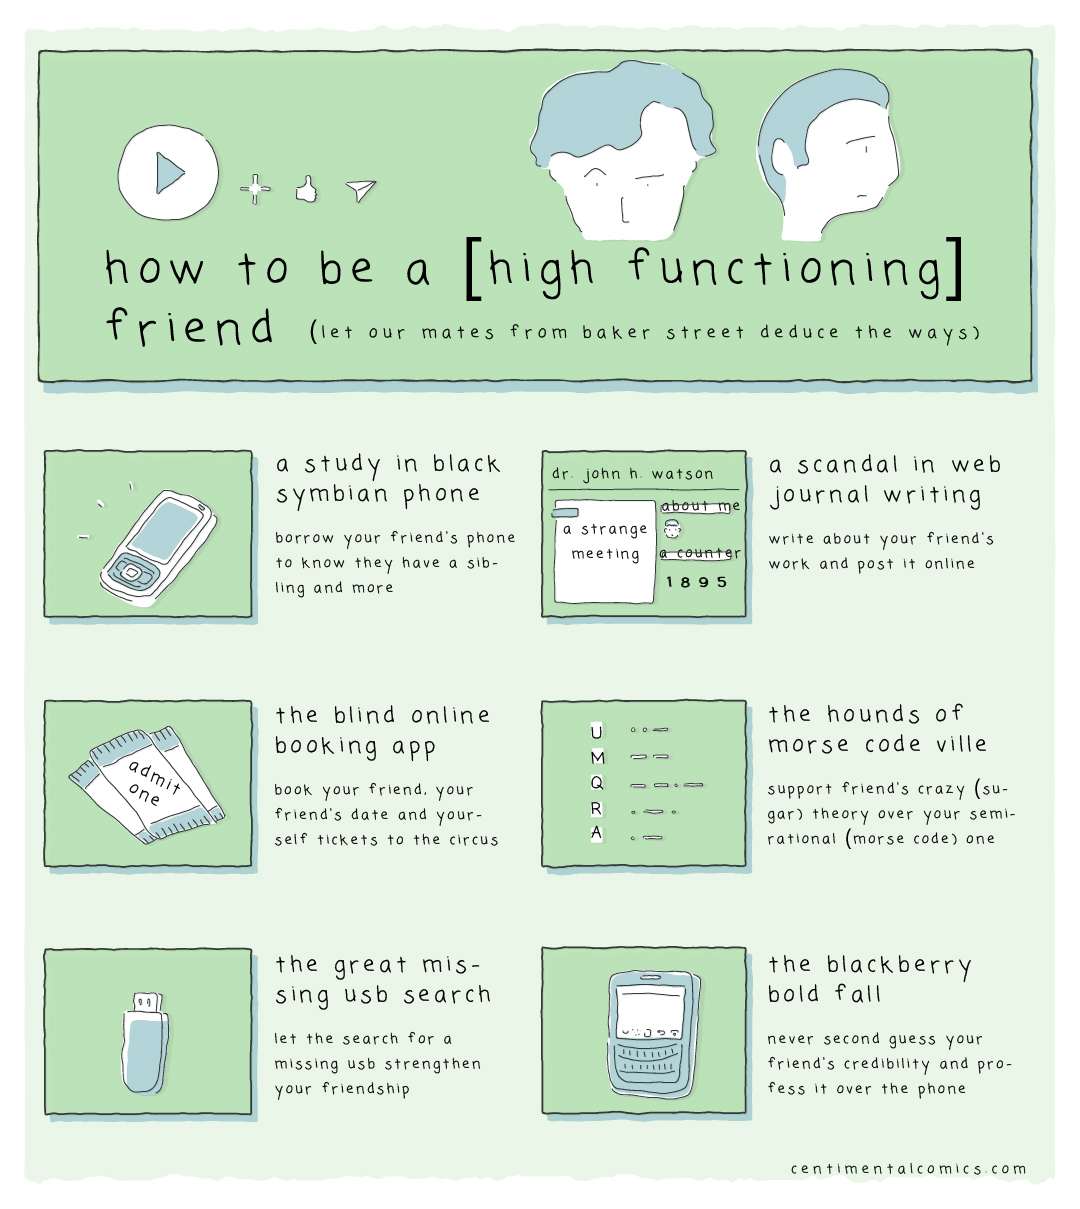 how to be a high-functioning friend